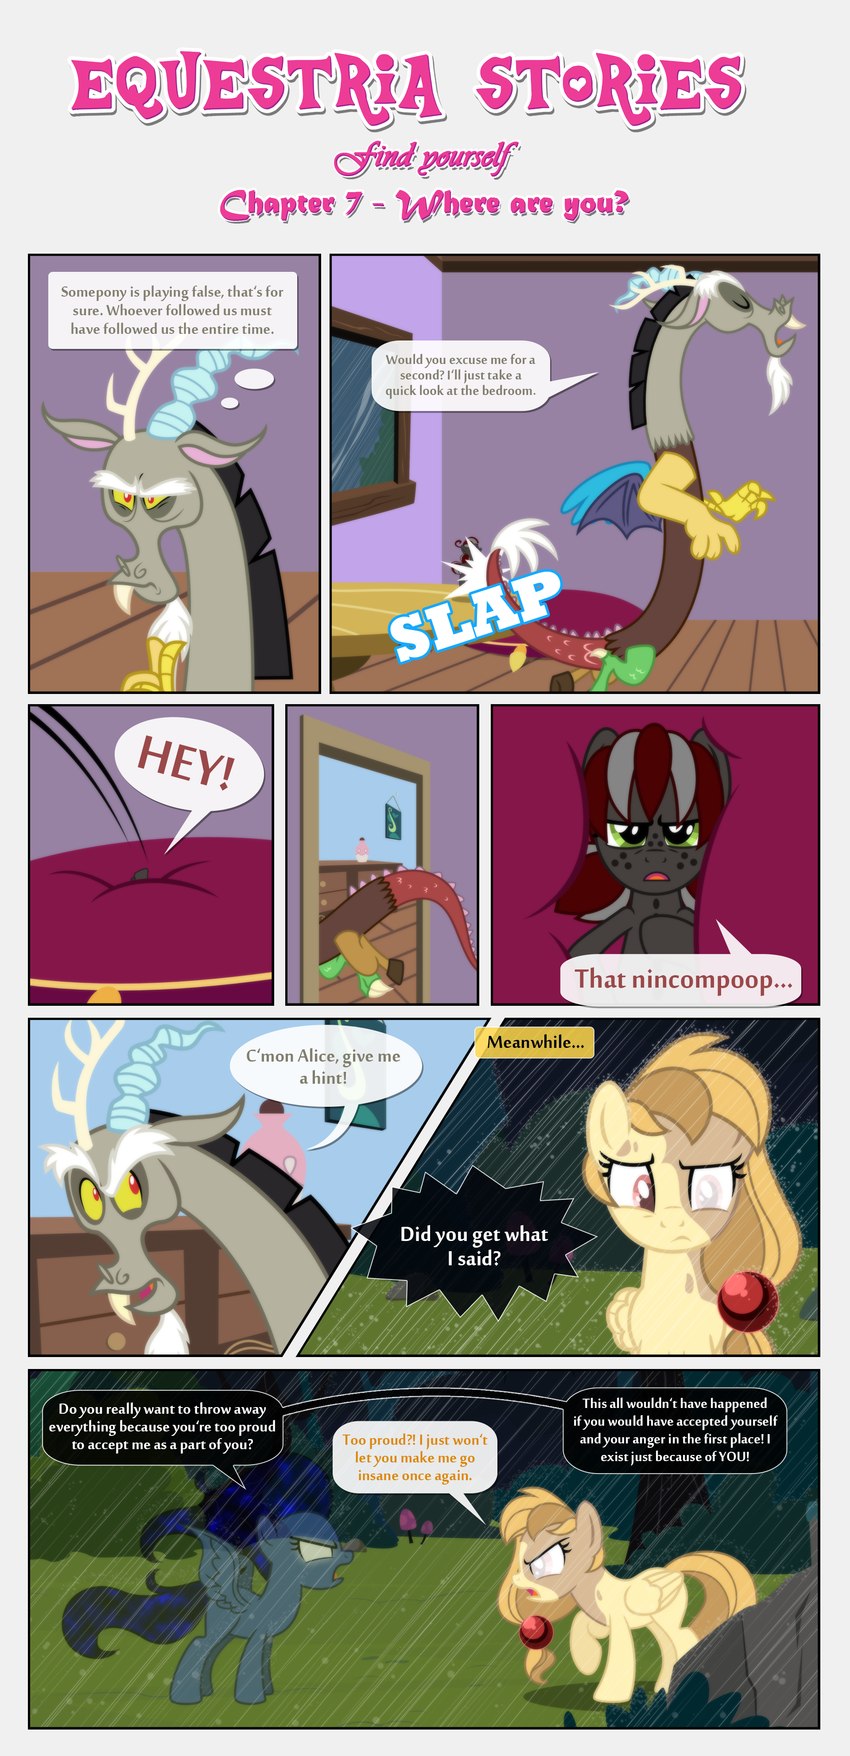 alice goldenfeather, discord, penumbra, and squeaky pitch (friendship is magic and etc) created by estories